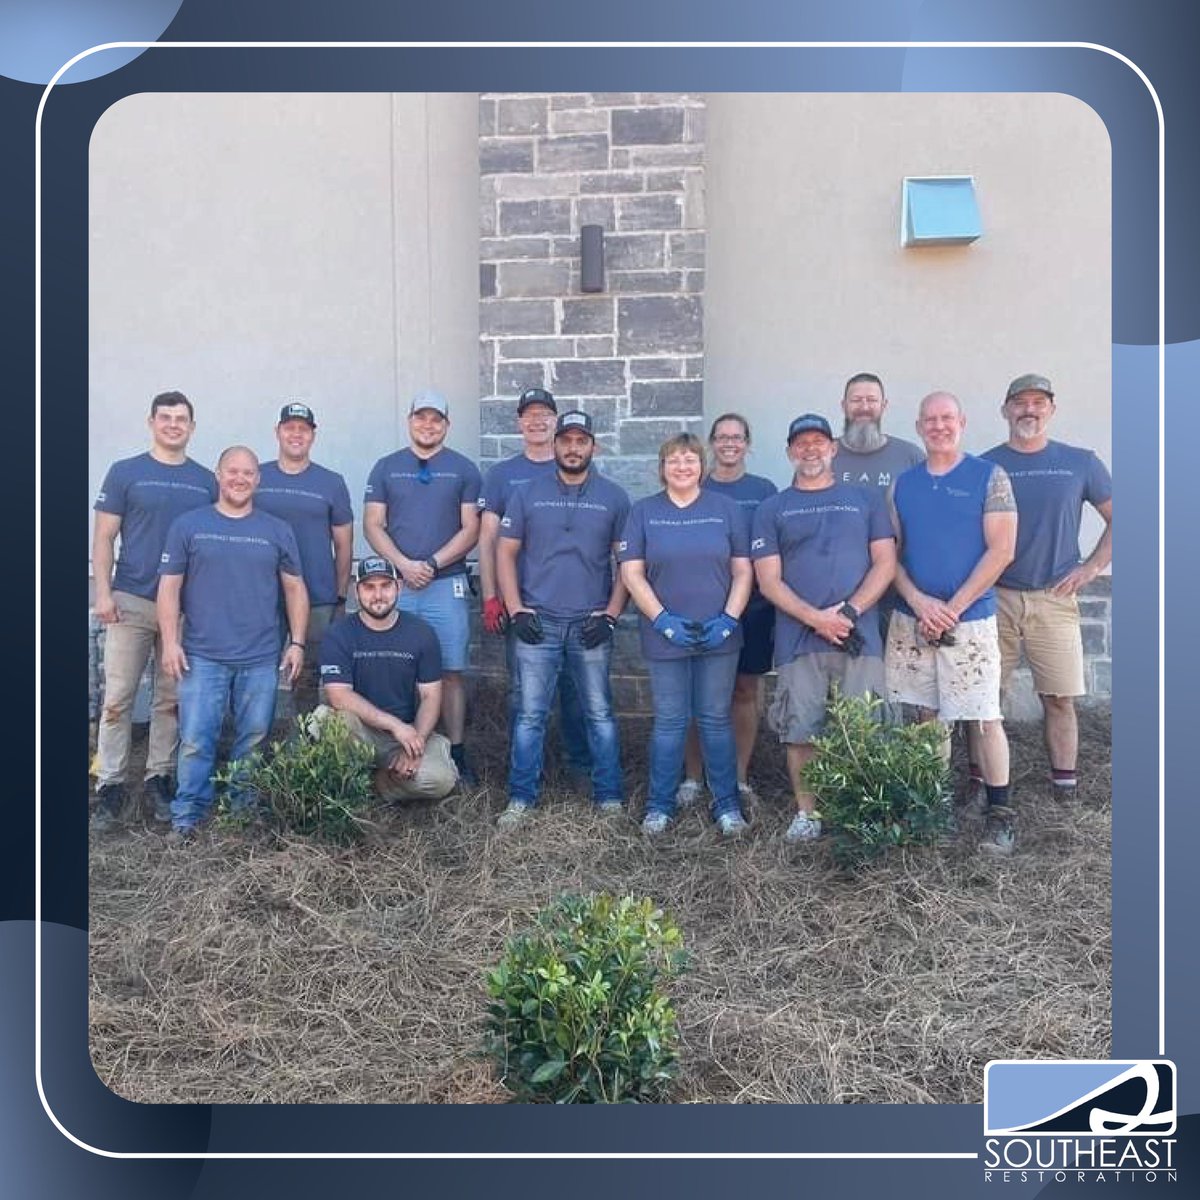 Every job is better when carried out with a smile. No matter the time or circumstance, our team is grateful to help and bring joy back into people's lives.

#SoutheastRestoration #restoration #Restoringlives #restorationexperts #Repairingproperty #Servicewithasmile #makeitfun